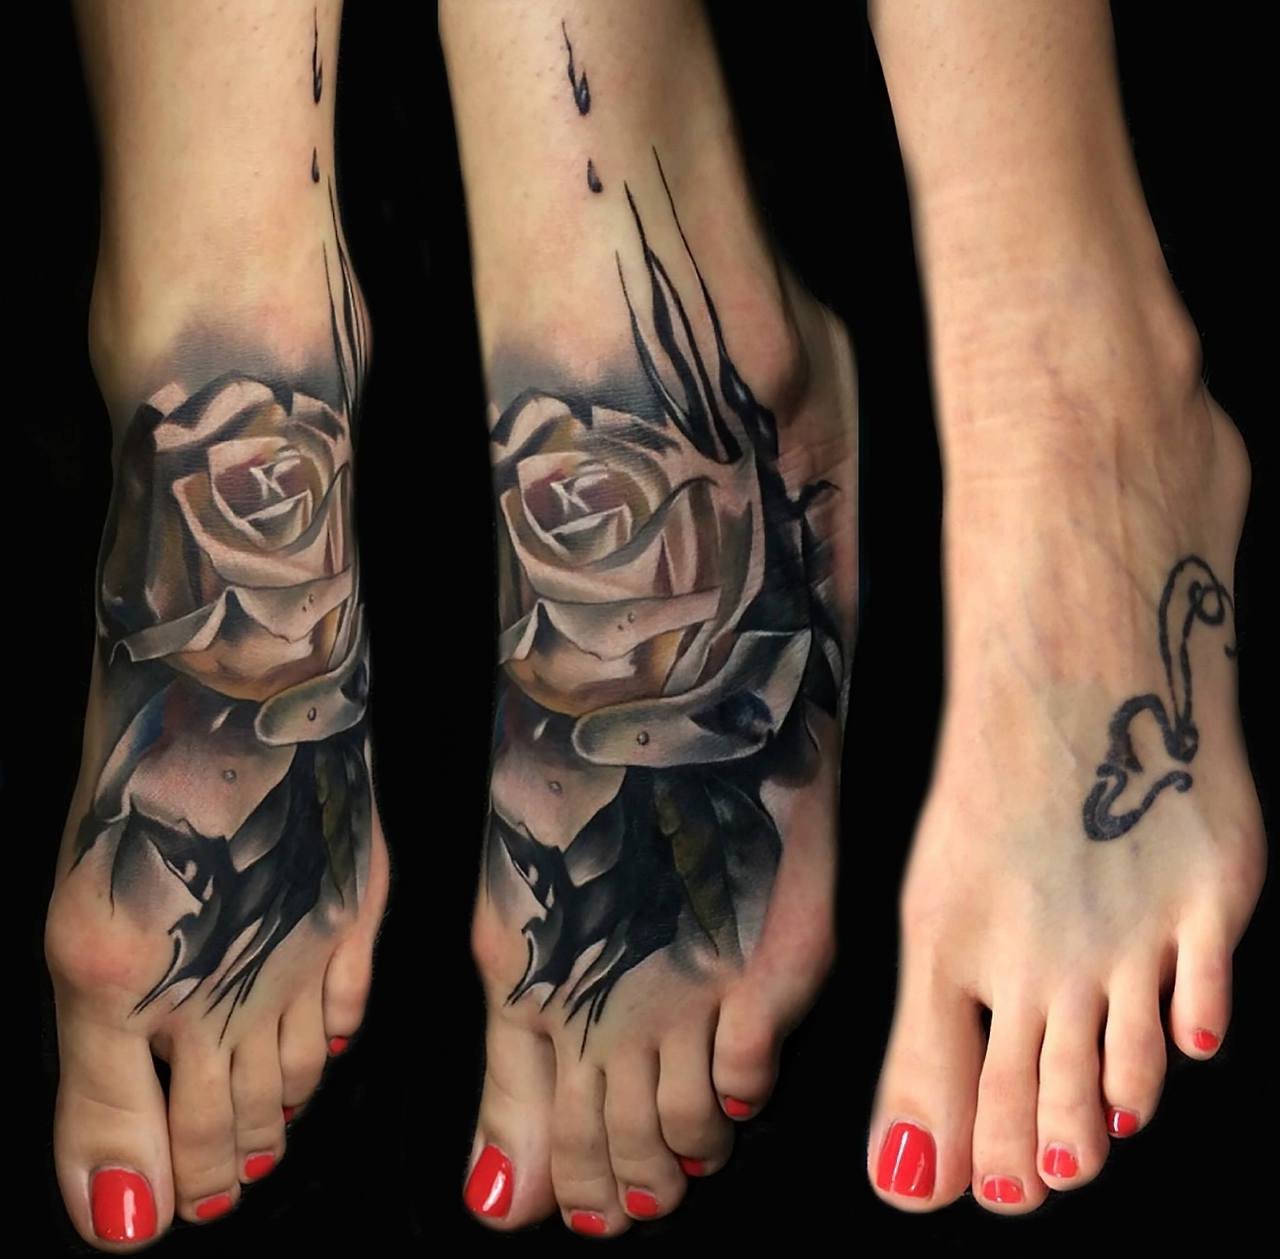 10 Beautiful Ideas For Tattoo Cover Ups foot rose cover up tattoo design best tattoo ideas gallery 2 2022